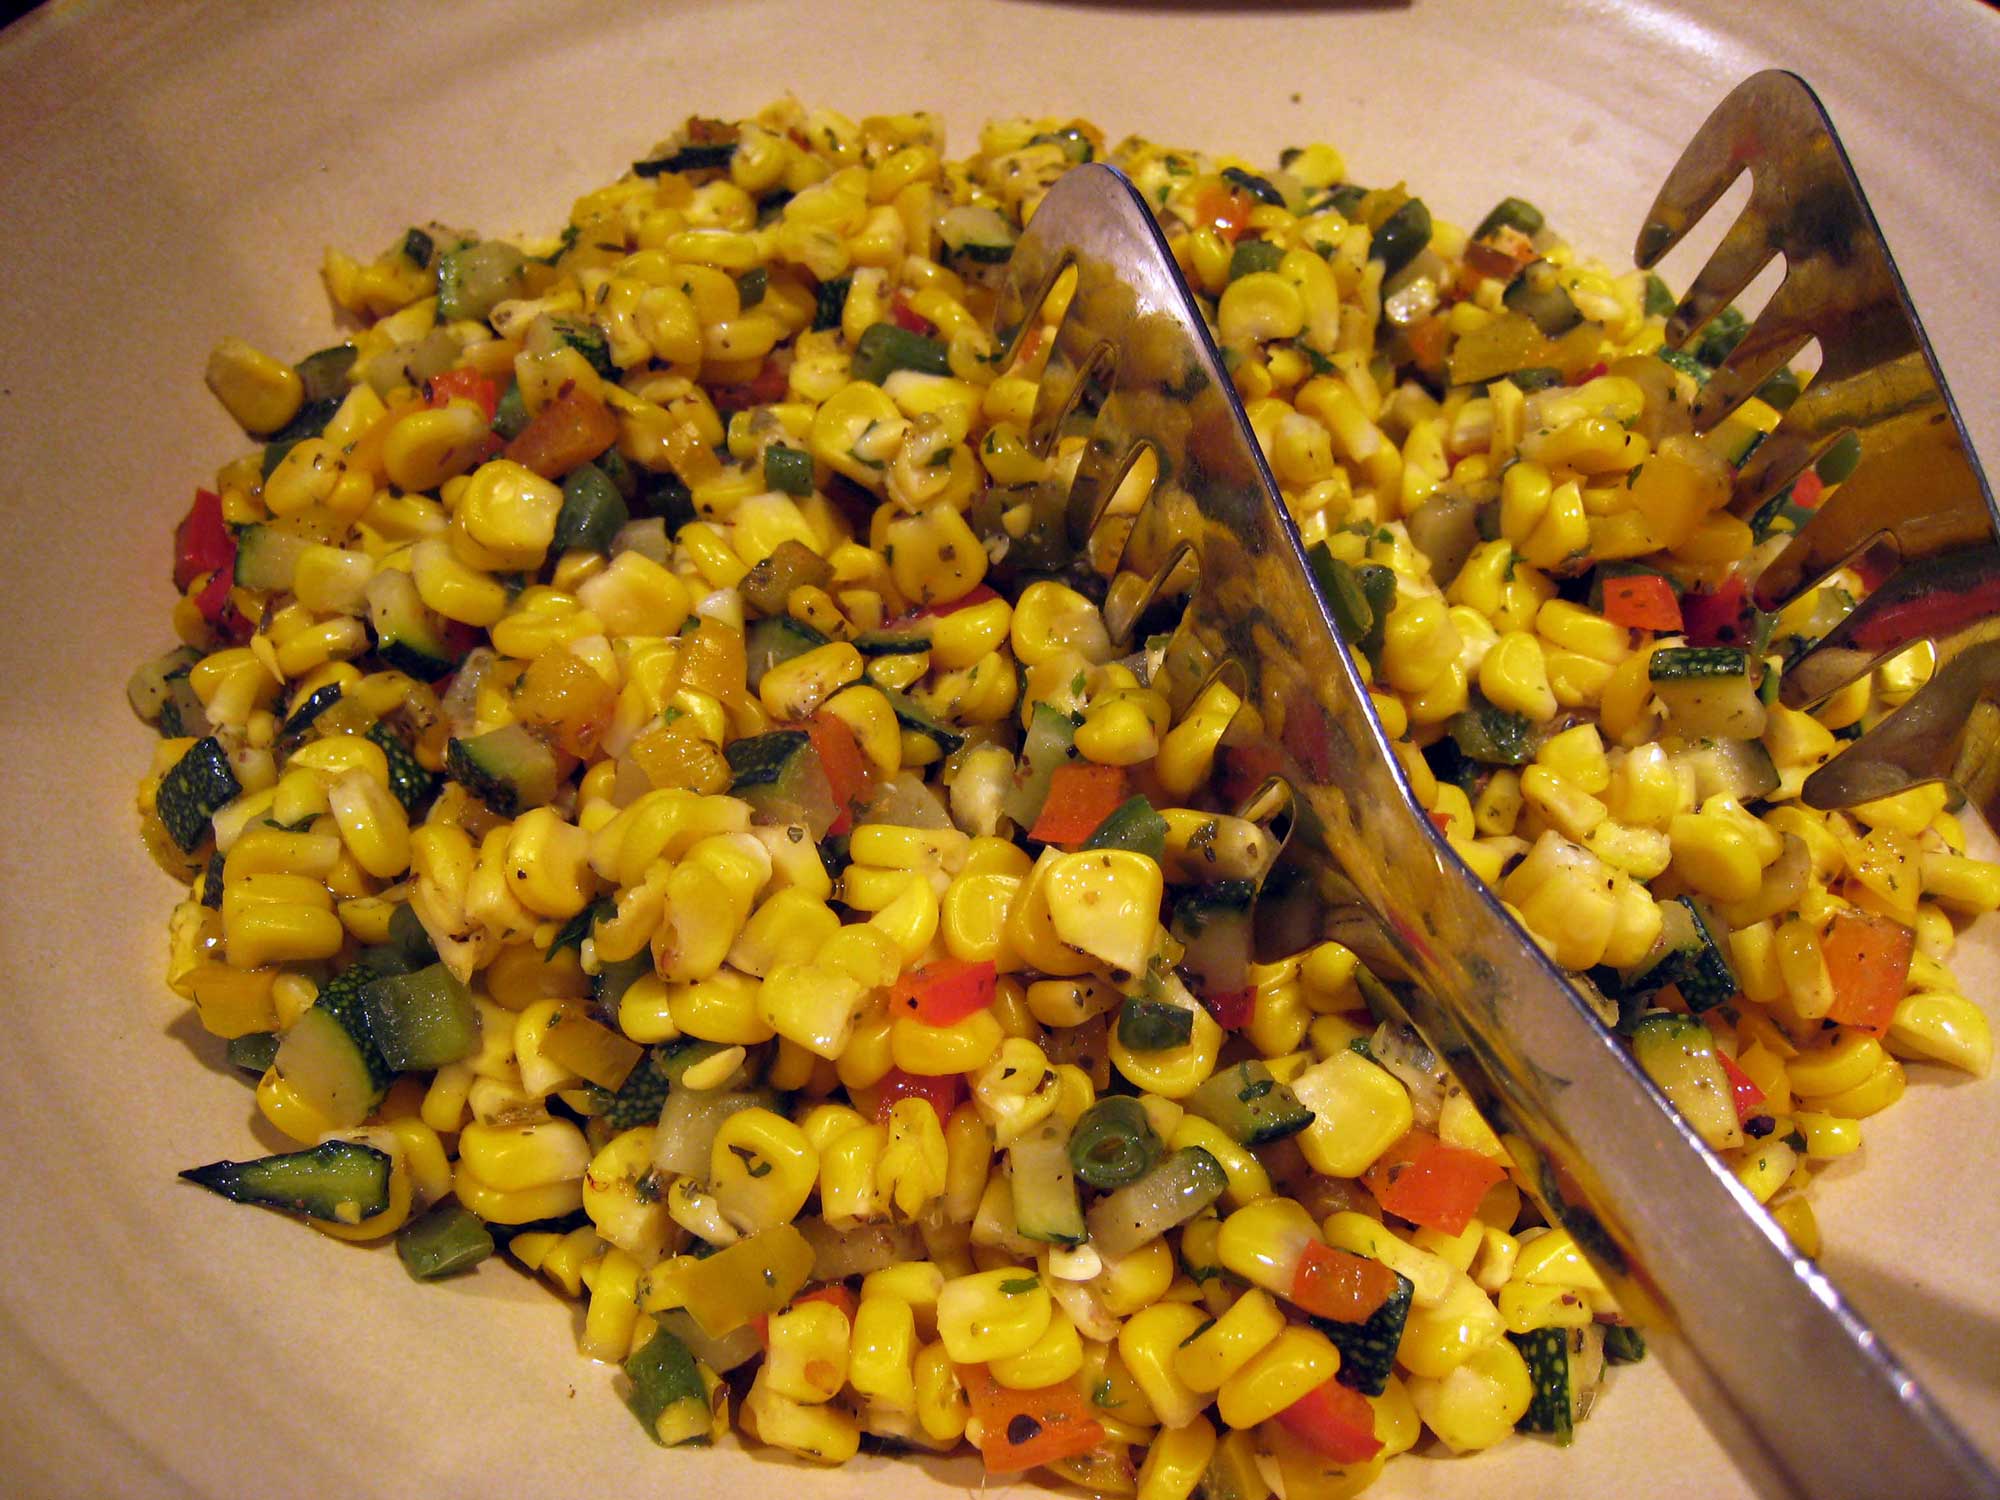 Photograph of succotash. The photo shows a mixture of cooked maize kernels with other ingredients in a white bowl with metal tongs resting in it.